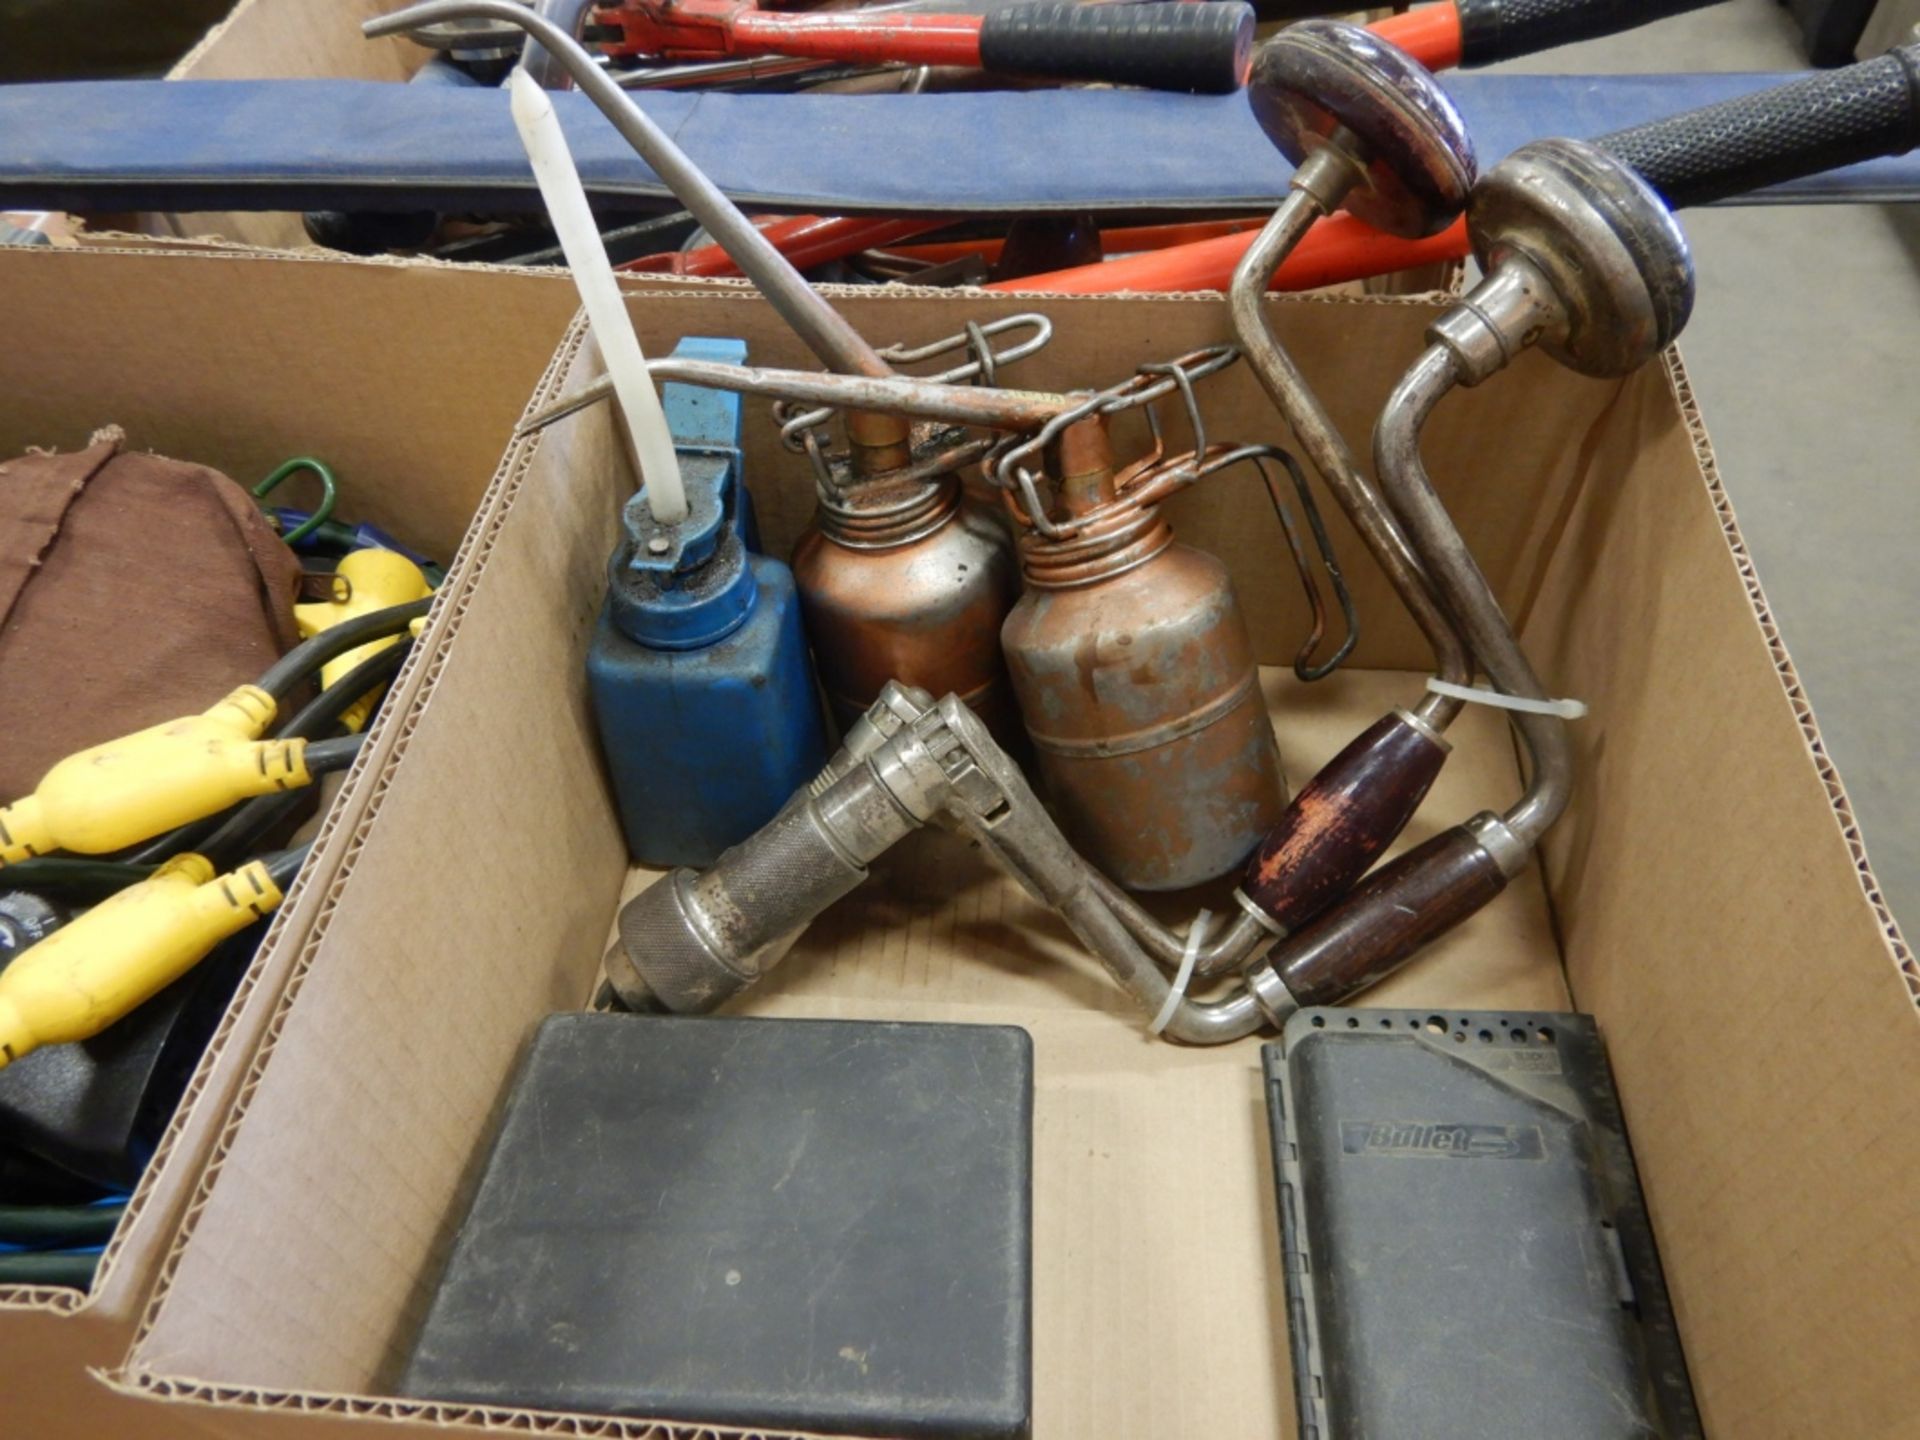 OIL CANS, DRILL BRACES, ELECTRIC CORDS, TIMER, TRAVEL IRON, ETC - Image 3 of 3